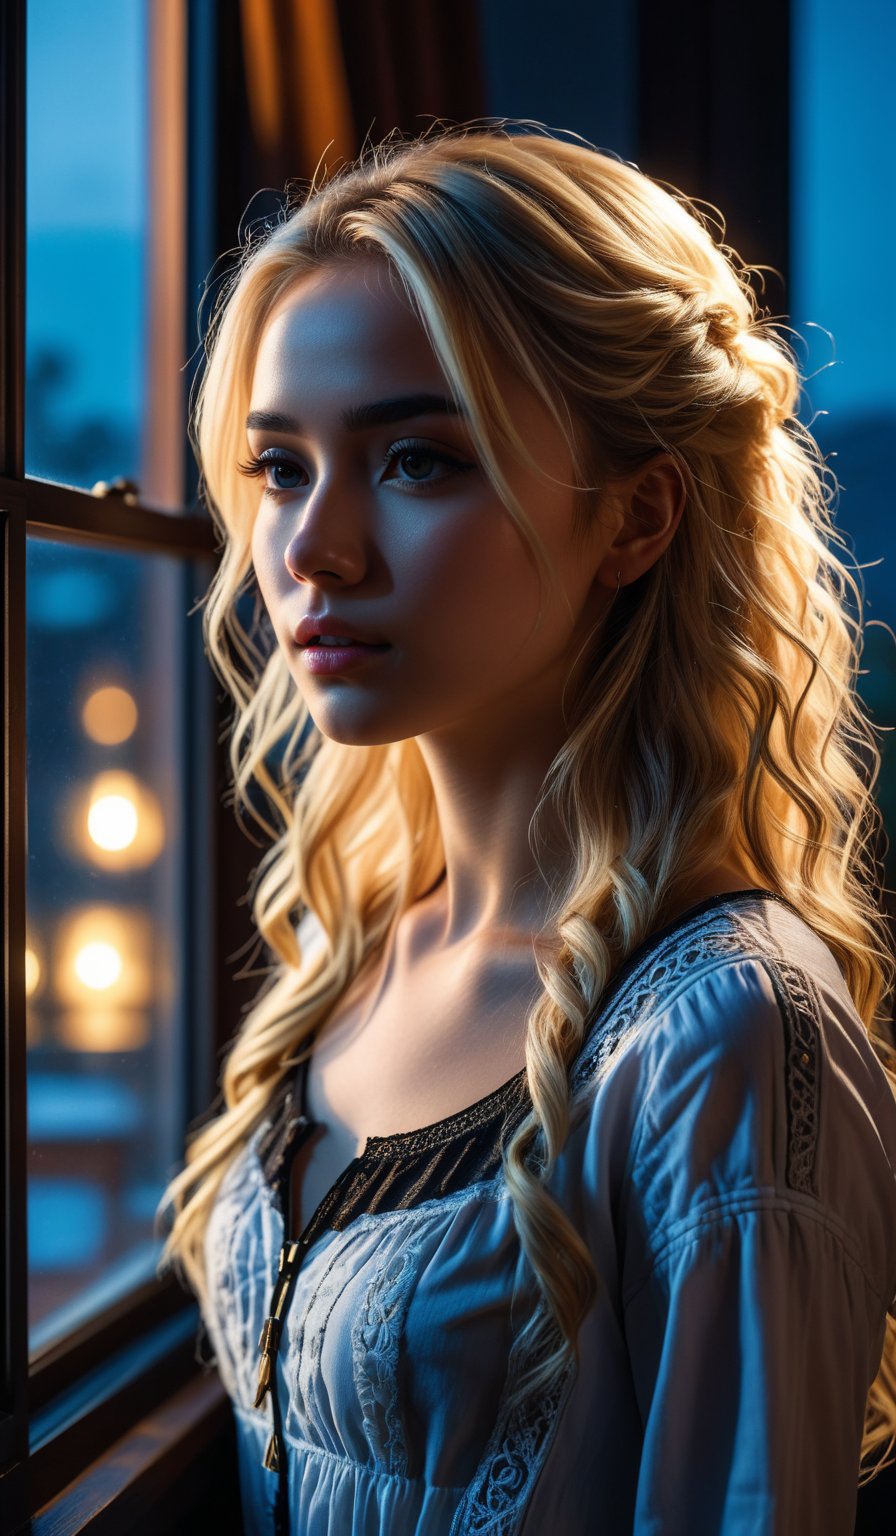 4k, 8k, ultra highres, raw photo in hdr, sharp focus, intricate texture, skin imperfections, realistic, detailed facial features, highly detailed face, posing,dark lighting,night time,((night)),window,moonlit face,low lighting,long hair,(blonde hair),standing side view,full bodyshot,dark room
,midjourney,mansion,emo,Enhance